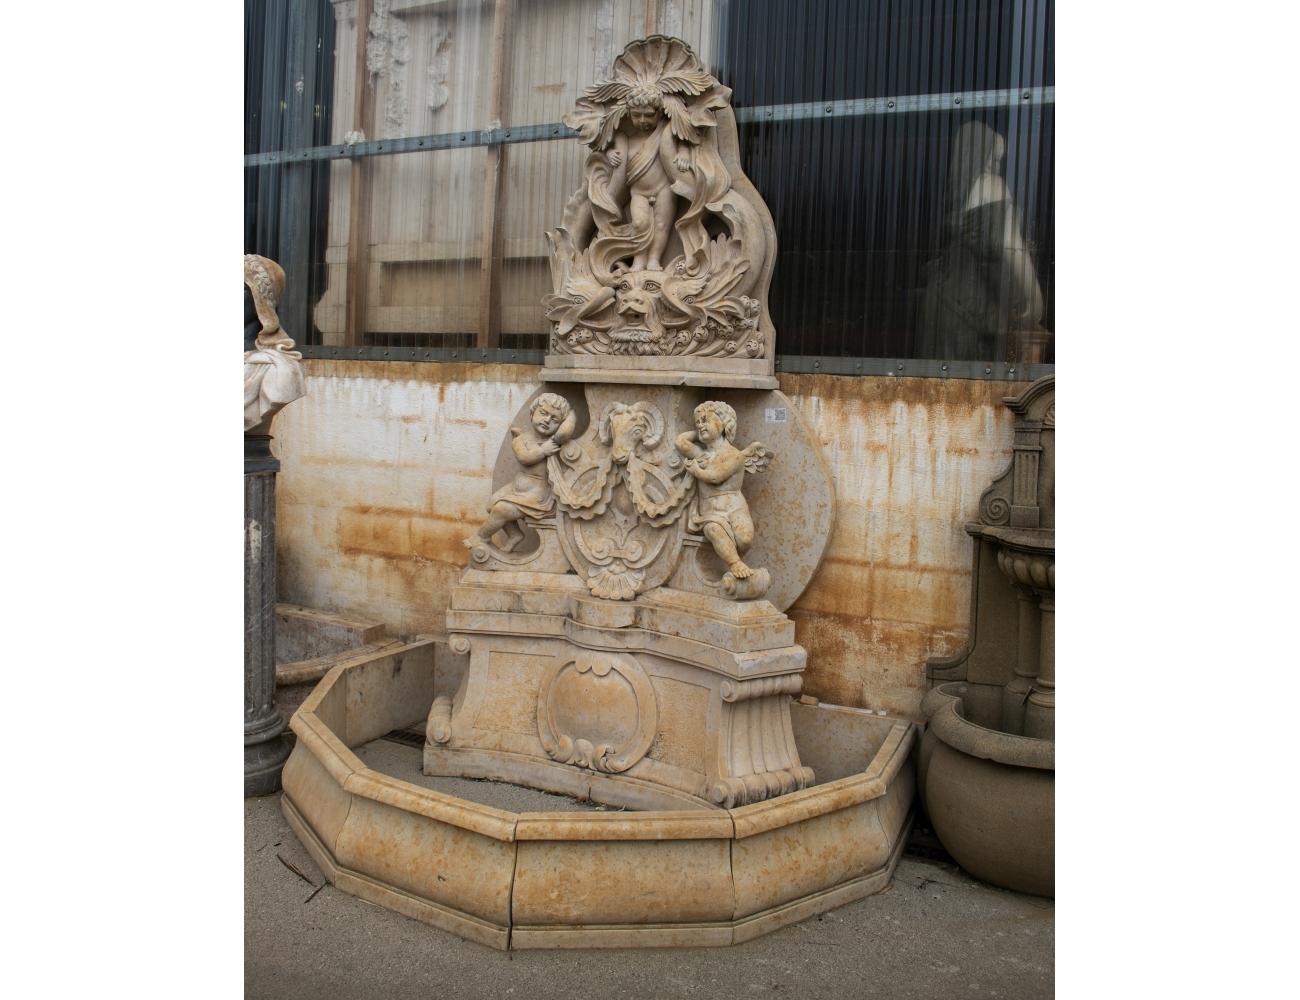 1990s European monumental hand carved cherub marble fountain with surround pool.